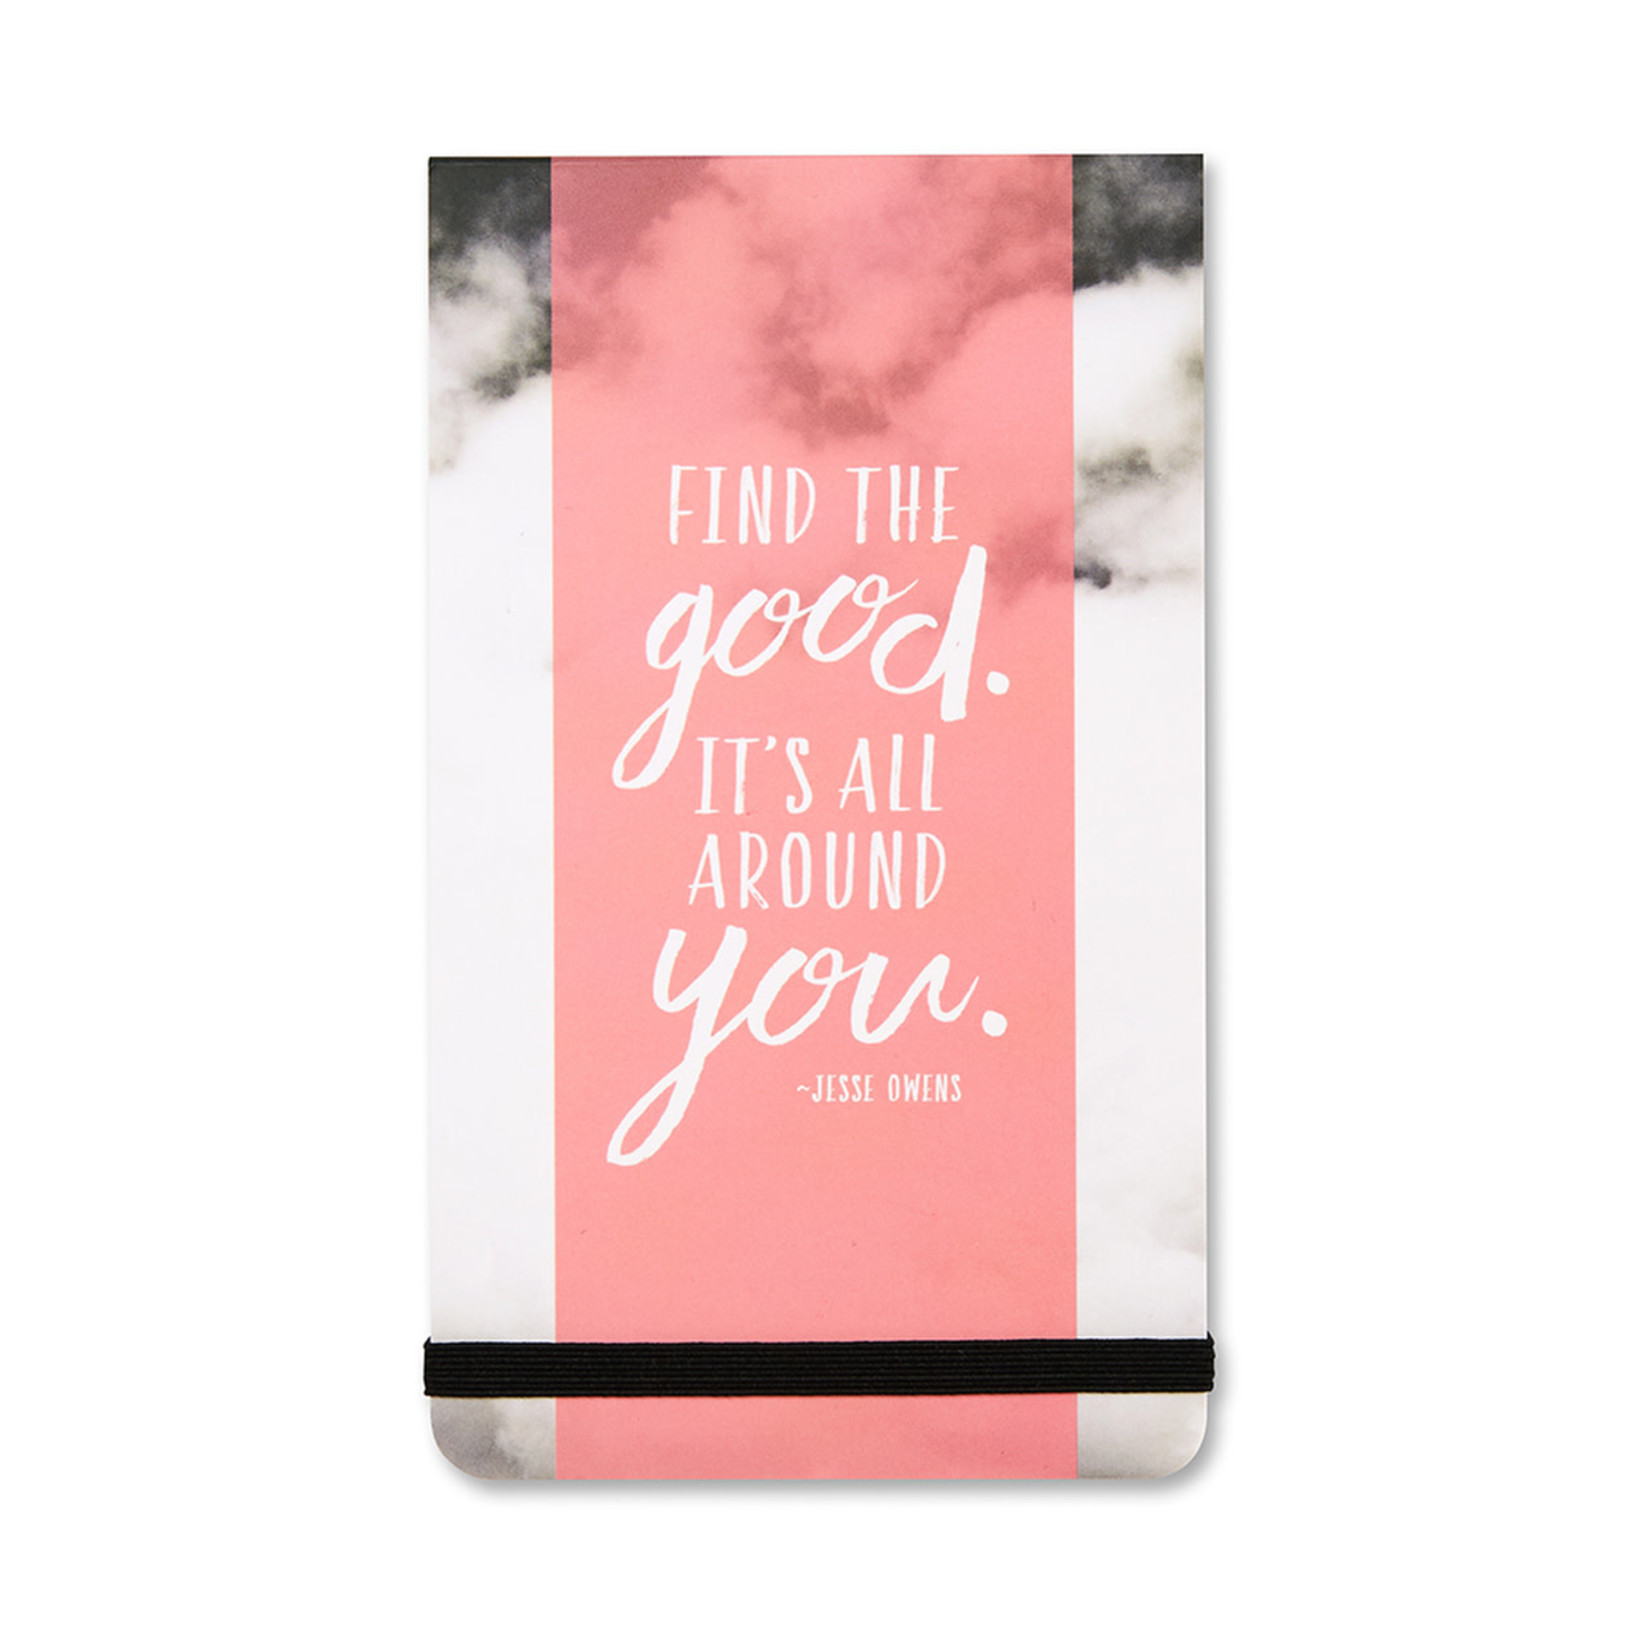 COMPENDIUM POCKET LIST PAD - FIND THE GOOD. IT'S ALL AROUND YOU.